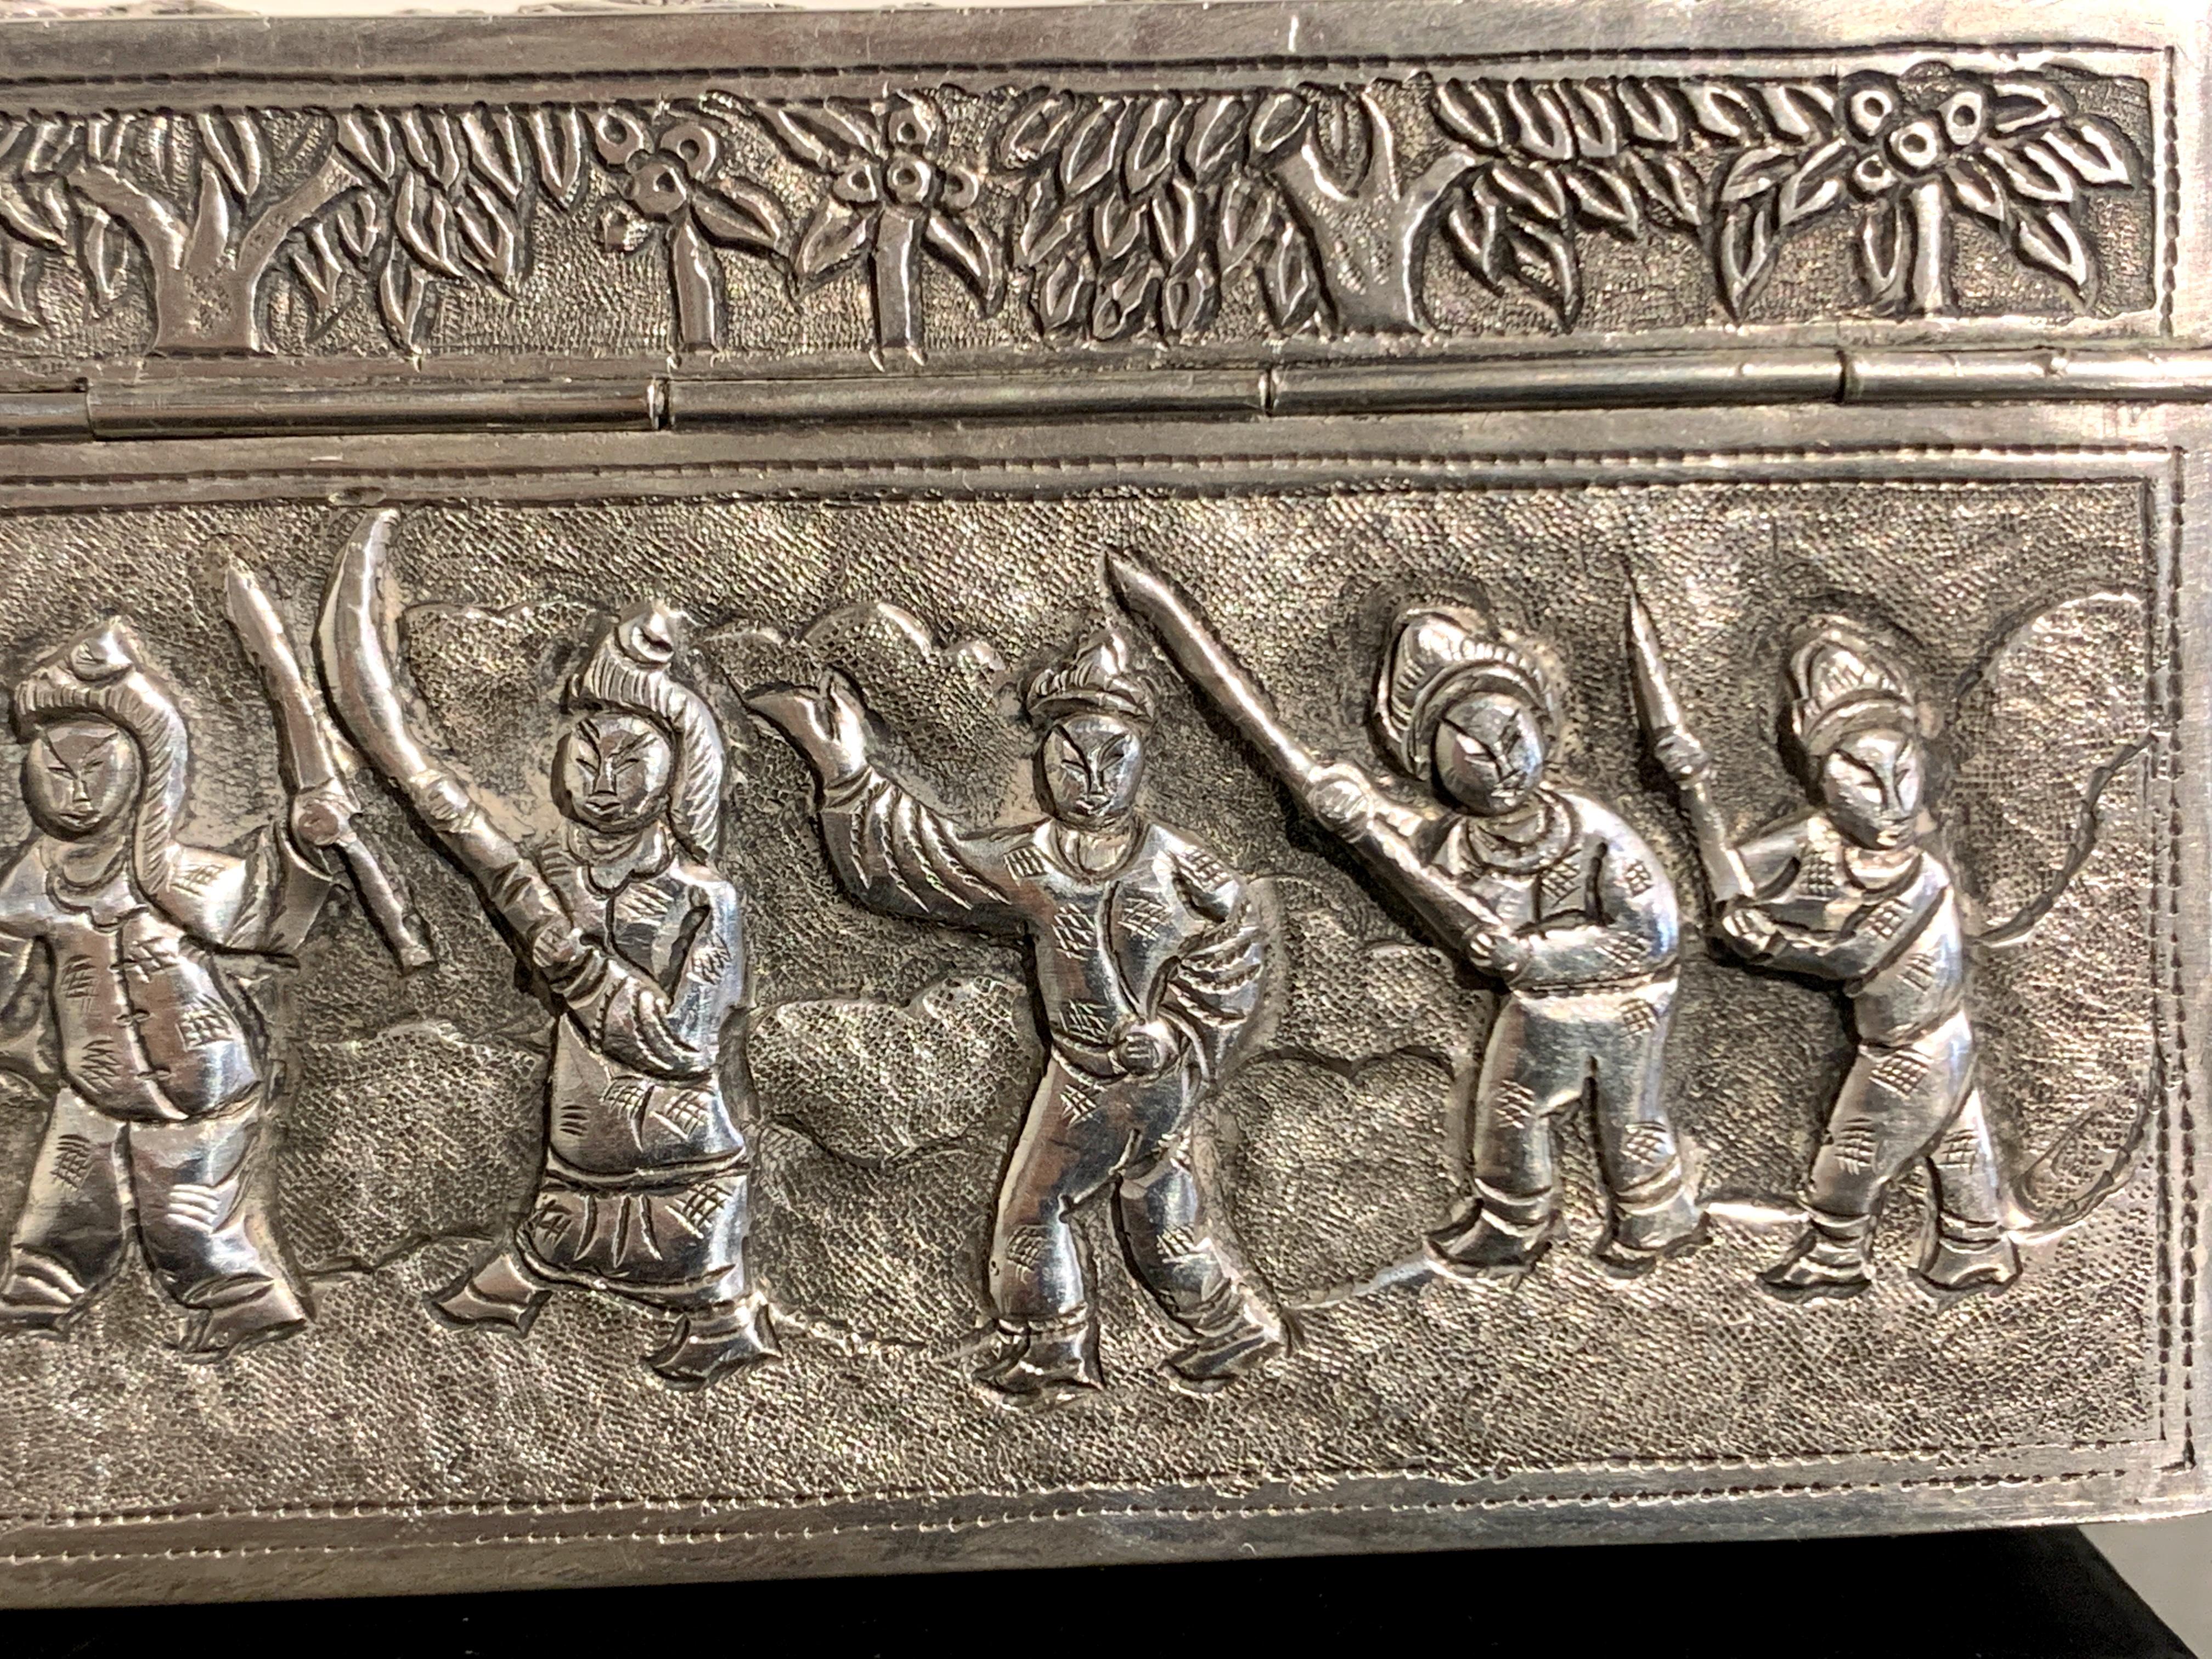 Chinese Silver Repoussé Box with Warriors, Early 20th Century, China